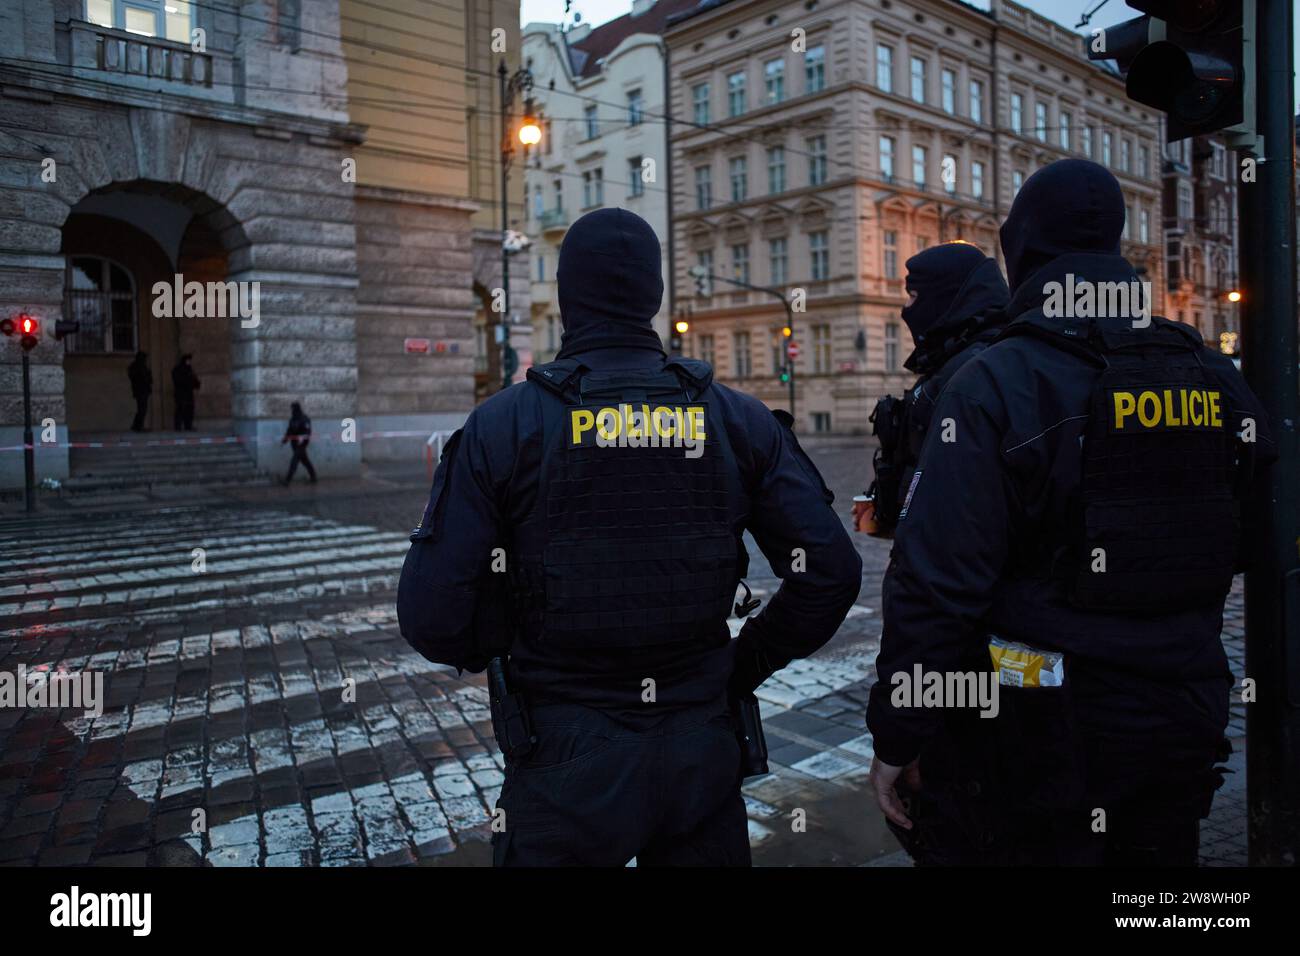 Building of Philosophic department of The Charles University. Attack inside The Charles University by student, who brought legally owned half automatic shoot-gun to the university in the bag and killed 14 students and wounded another 25. 22.12.2023 Prague, Czech Republic. Credit: Martin Hladik/AFLO/Alamy Live News Stock Photo